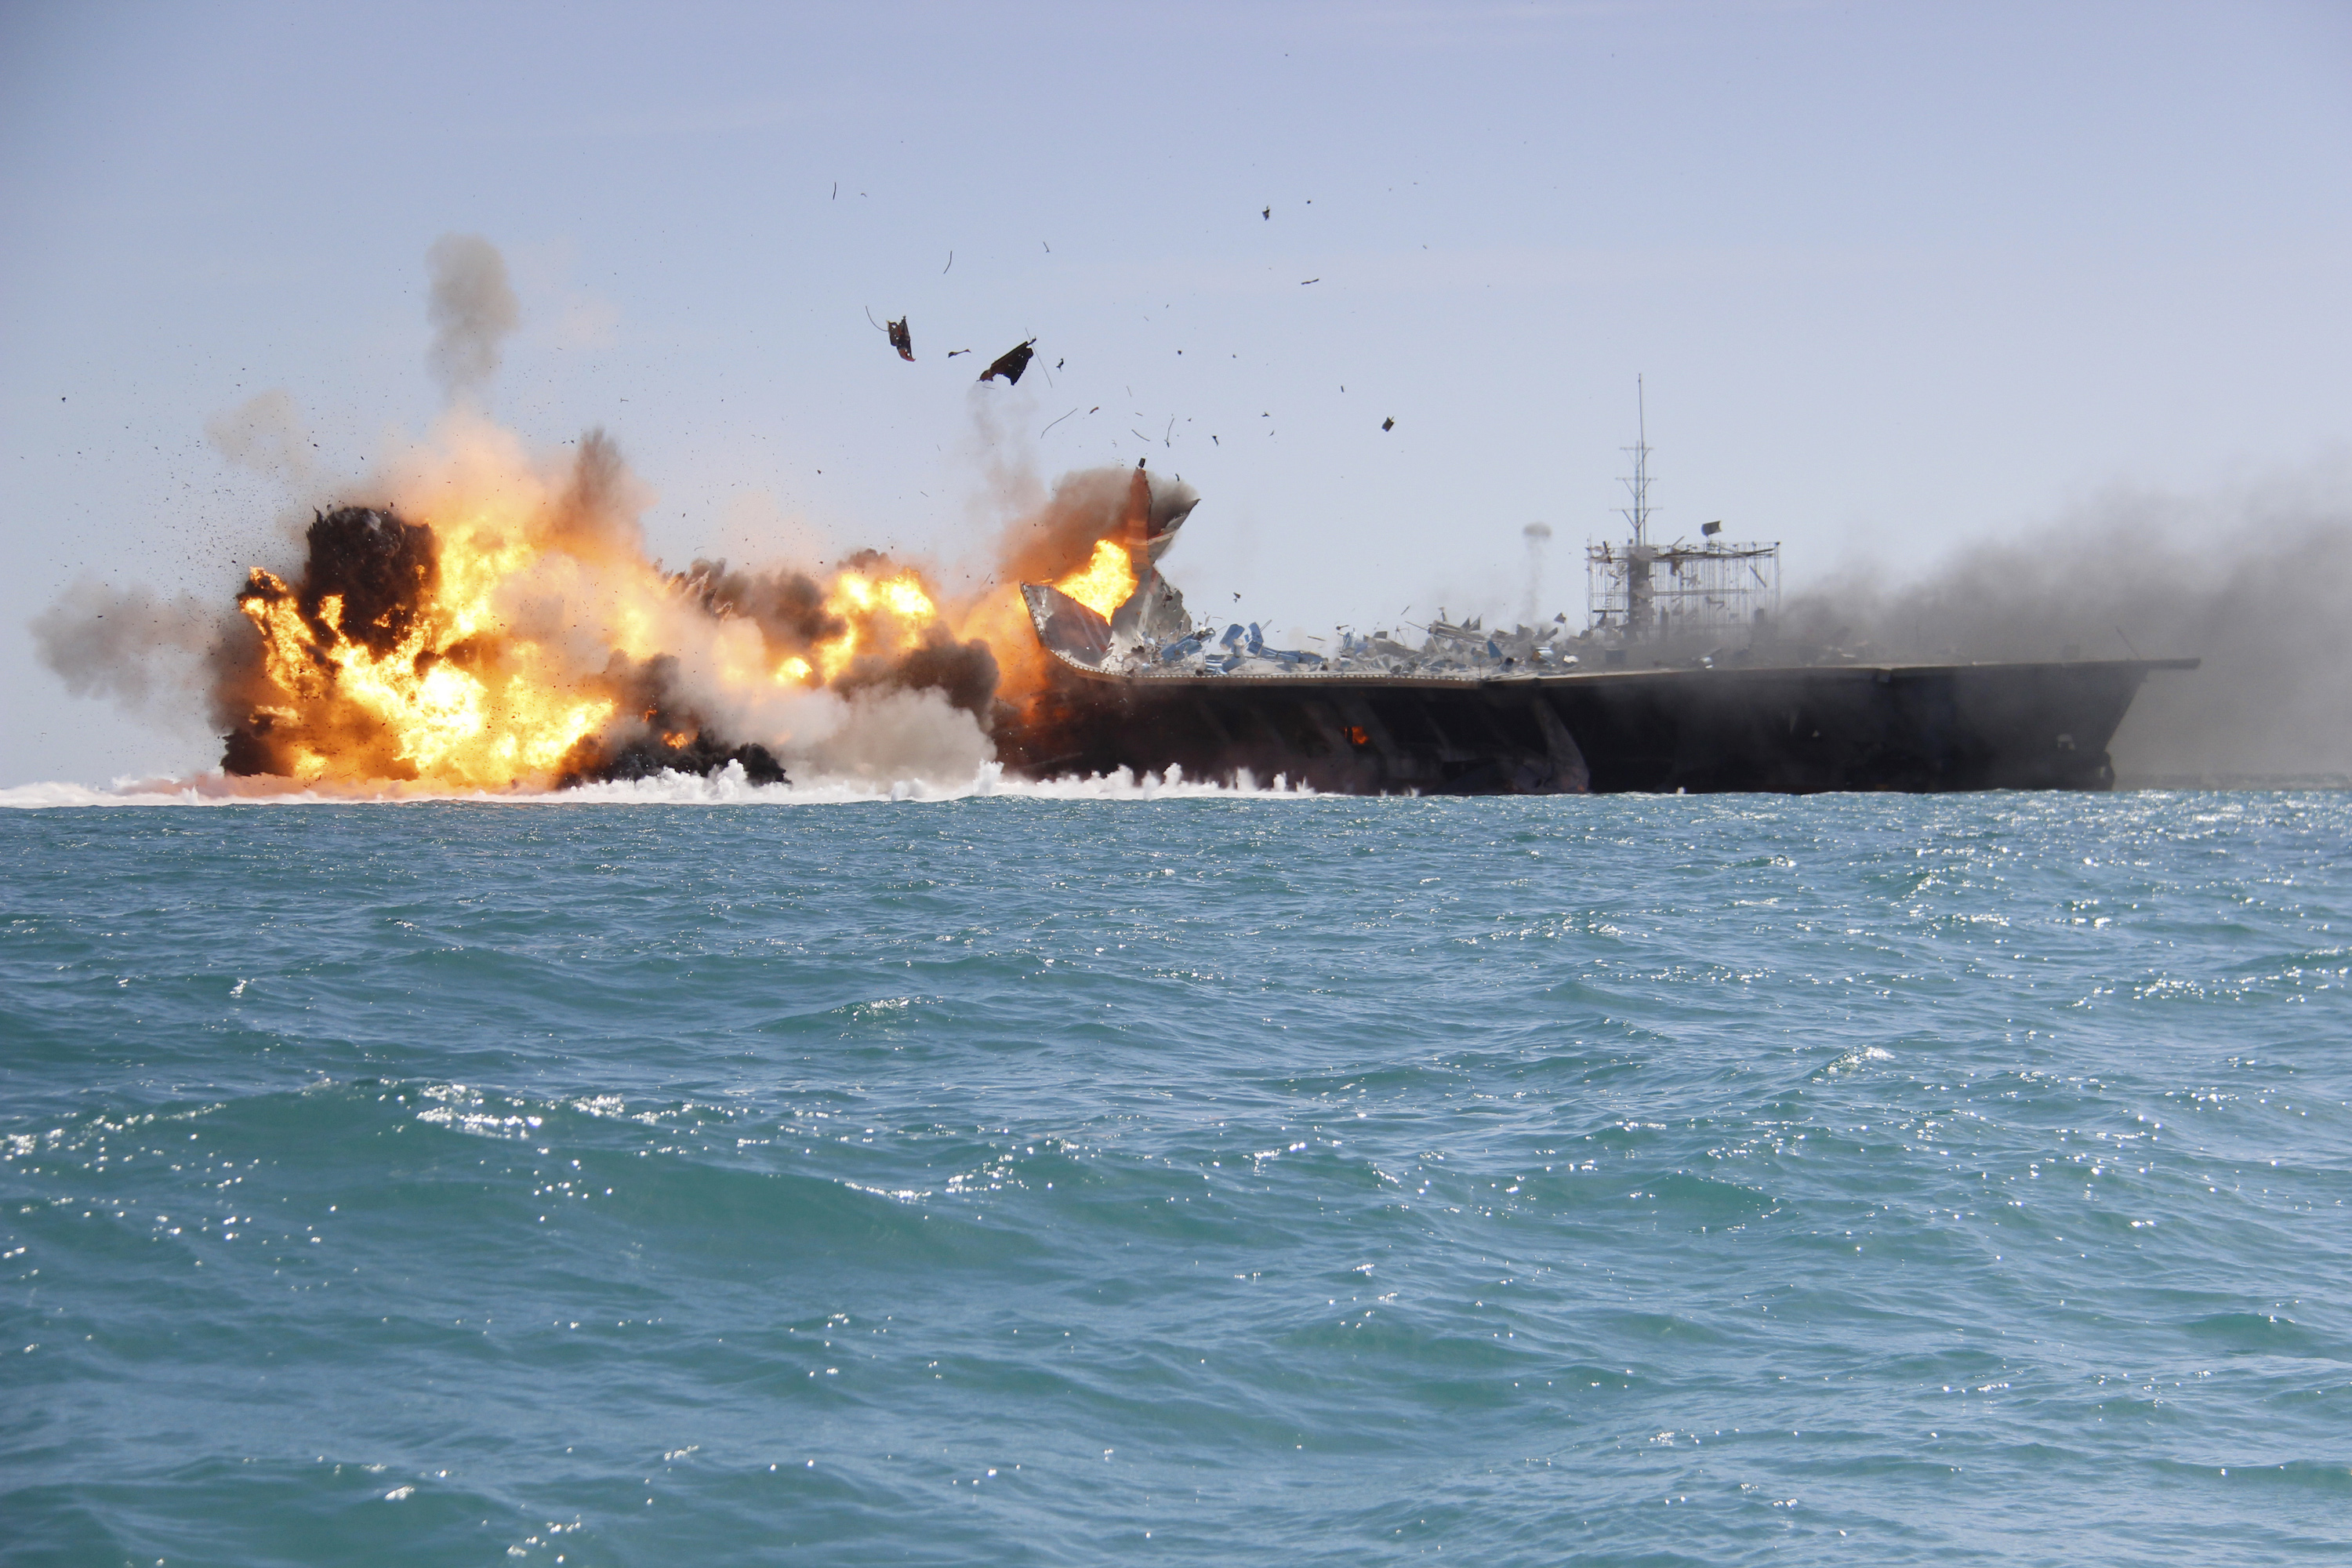 A replica of a U.S. aircraft carrier is exploded by the Revolutionary Guard during naval drills near the entrance of the Persian Gulf, Iran on Feb. 25, 2015. (Iranian Tasnim News Agency/AP)